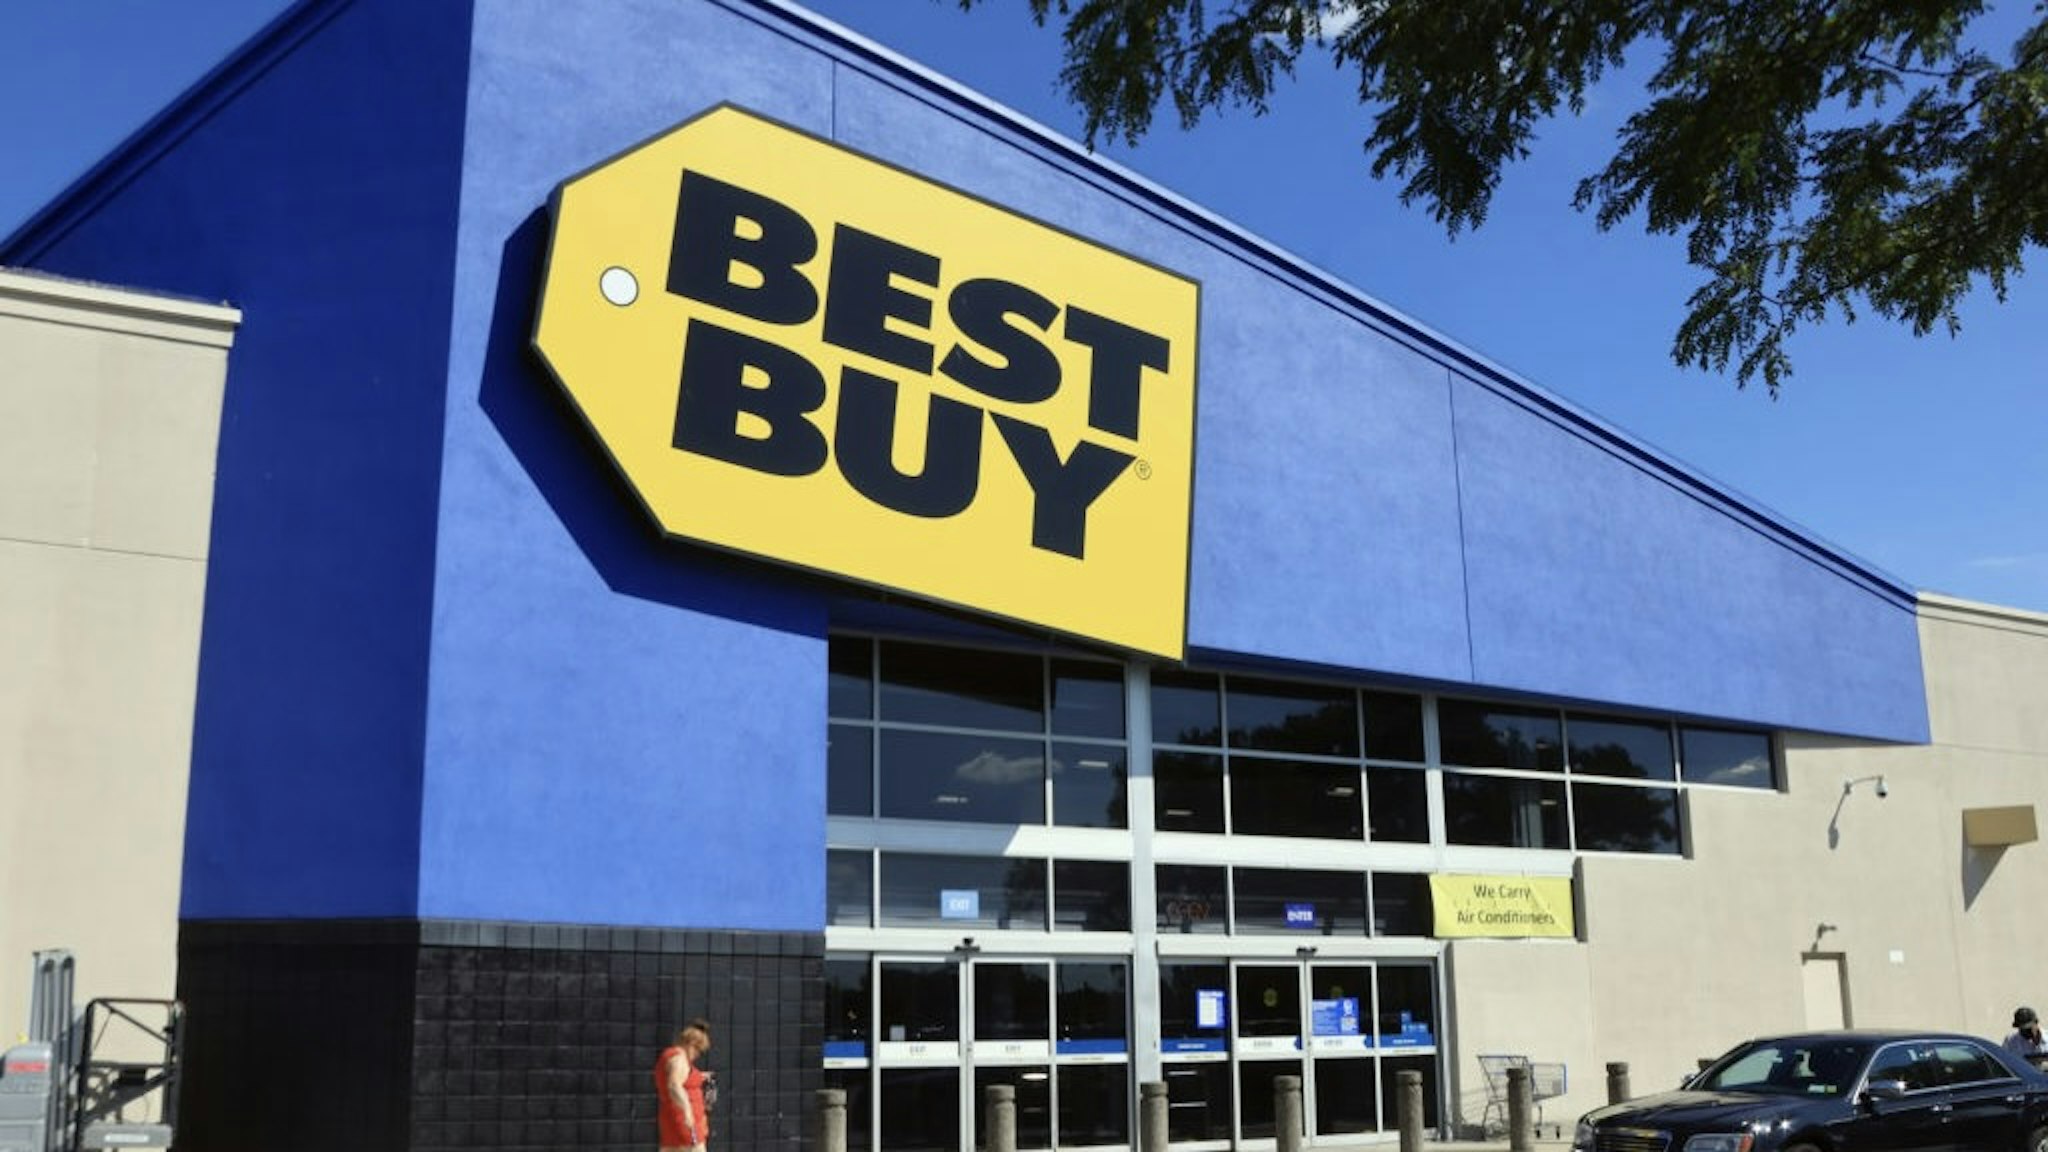 General Views of New York LEVITTOWN, NEW YORK - SEPTEMBER 15: A general view of a Best Buy store on September 15, 2022 in Levittown, New York, United States. Many families along with businesses are suffering the effects of inflation as the economy is dictating a change in spending habits. (Photo by Bruce Bennett/Getty Images) Bruce Bennett / Staff